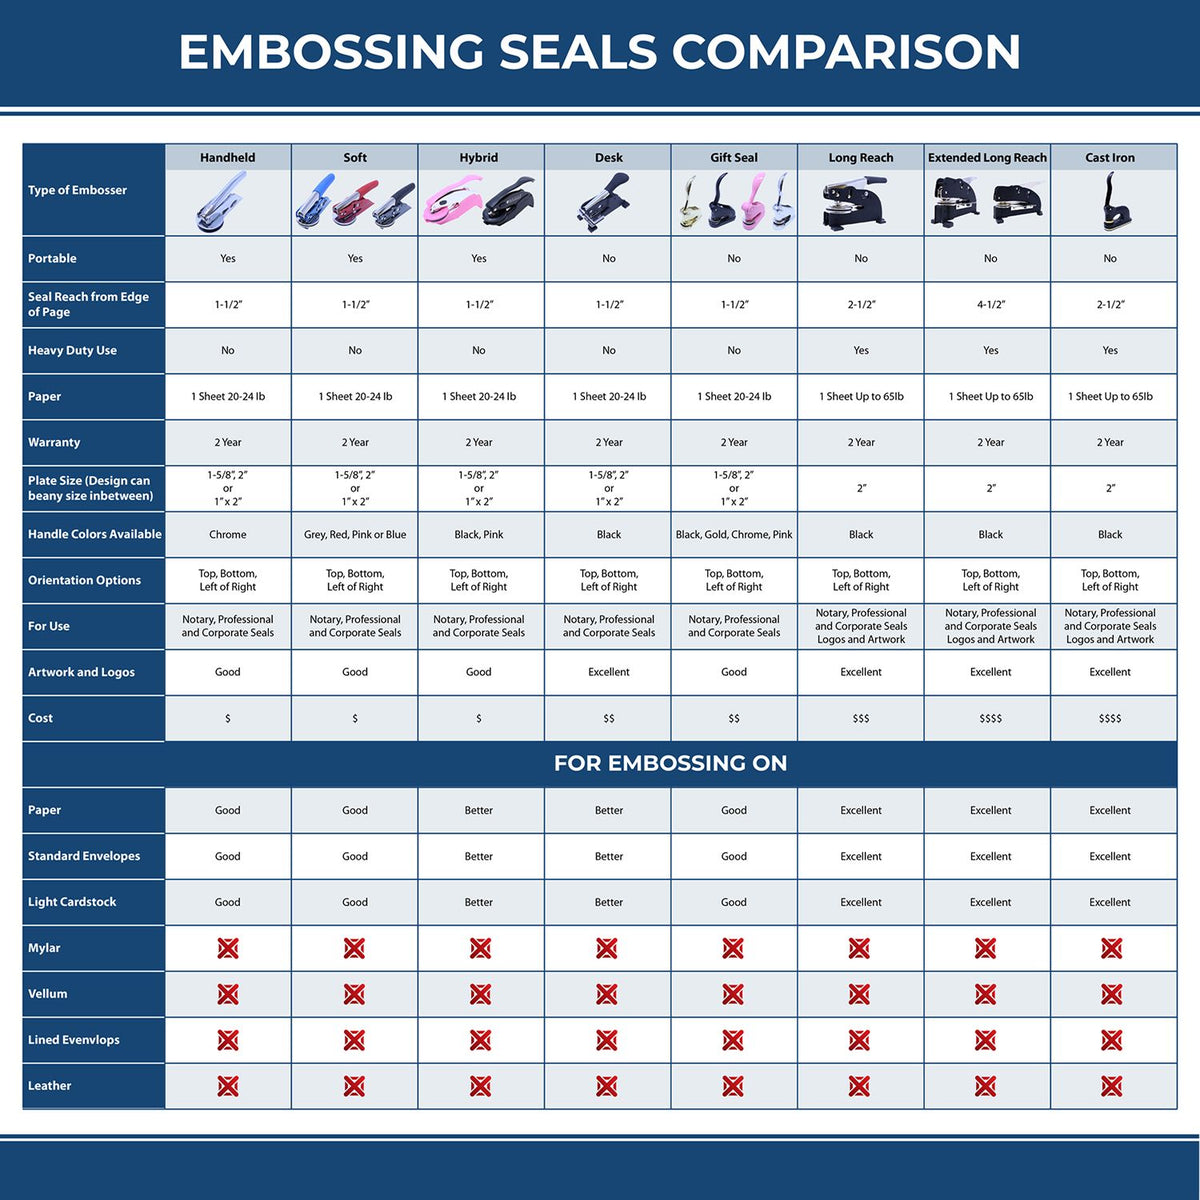 A comparison chart for the different types of mount models available for the State of Nevada Extended Long Reach Geologist Seal